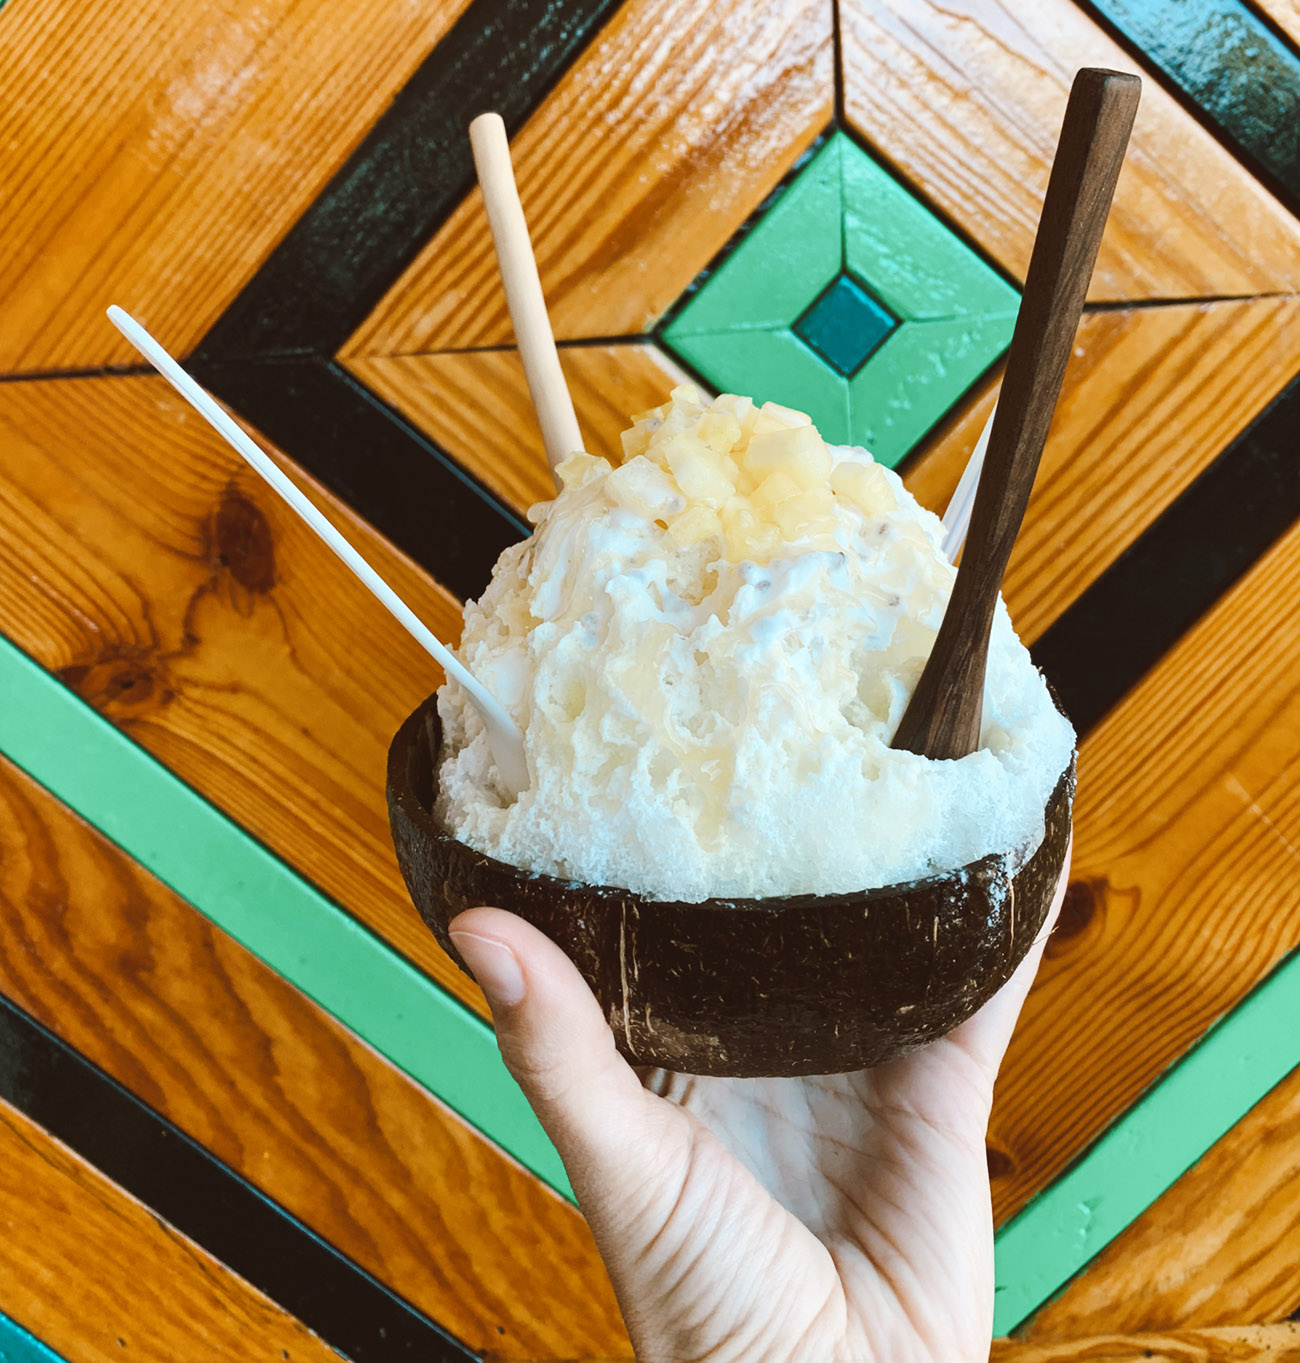 Shave Ice in Kauai in a Coconut Shell